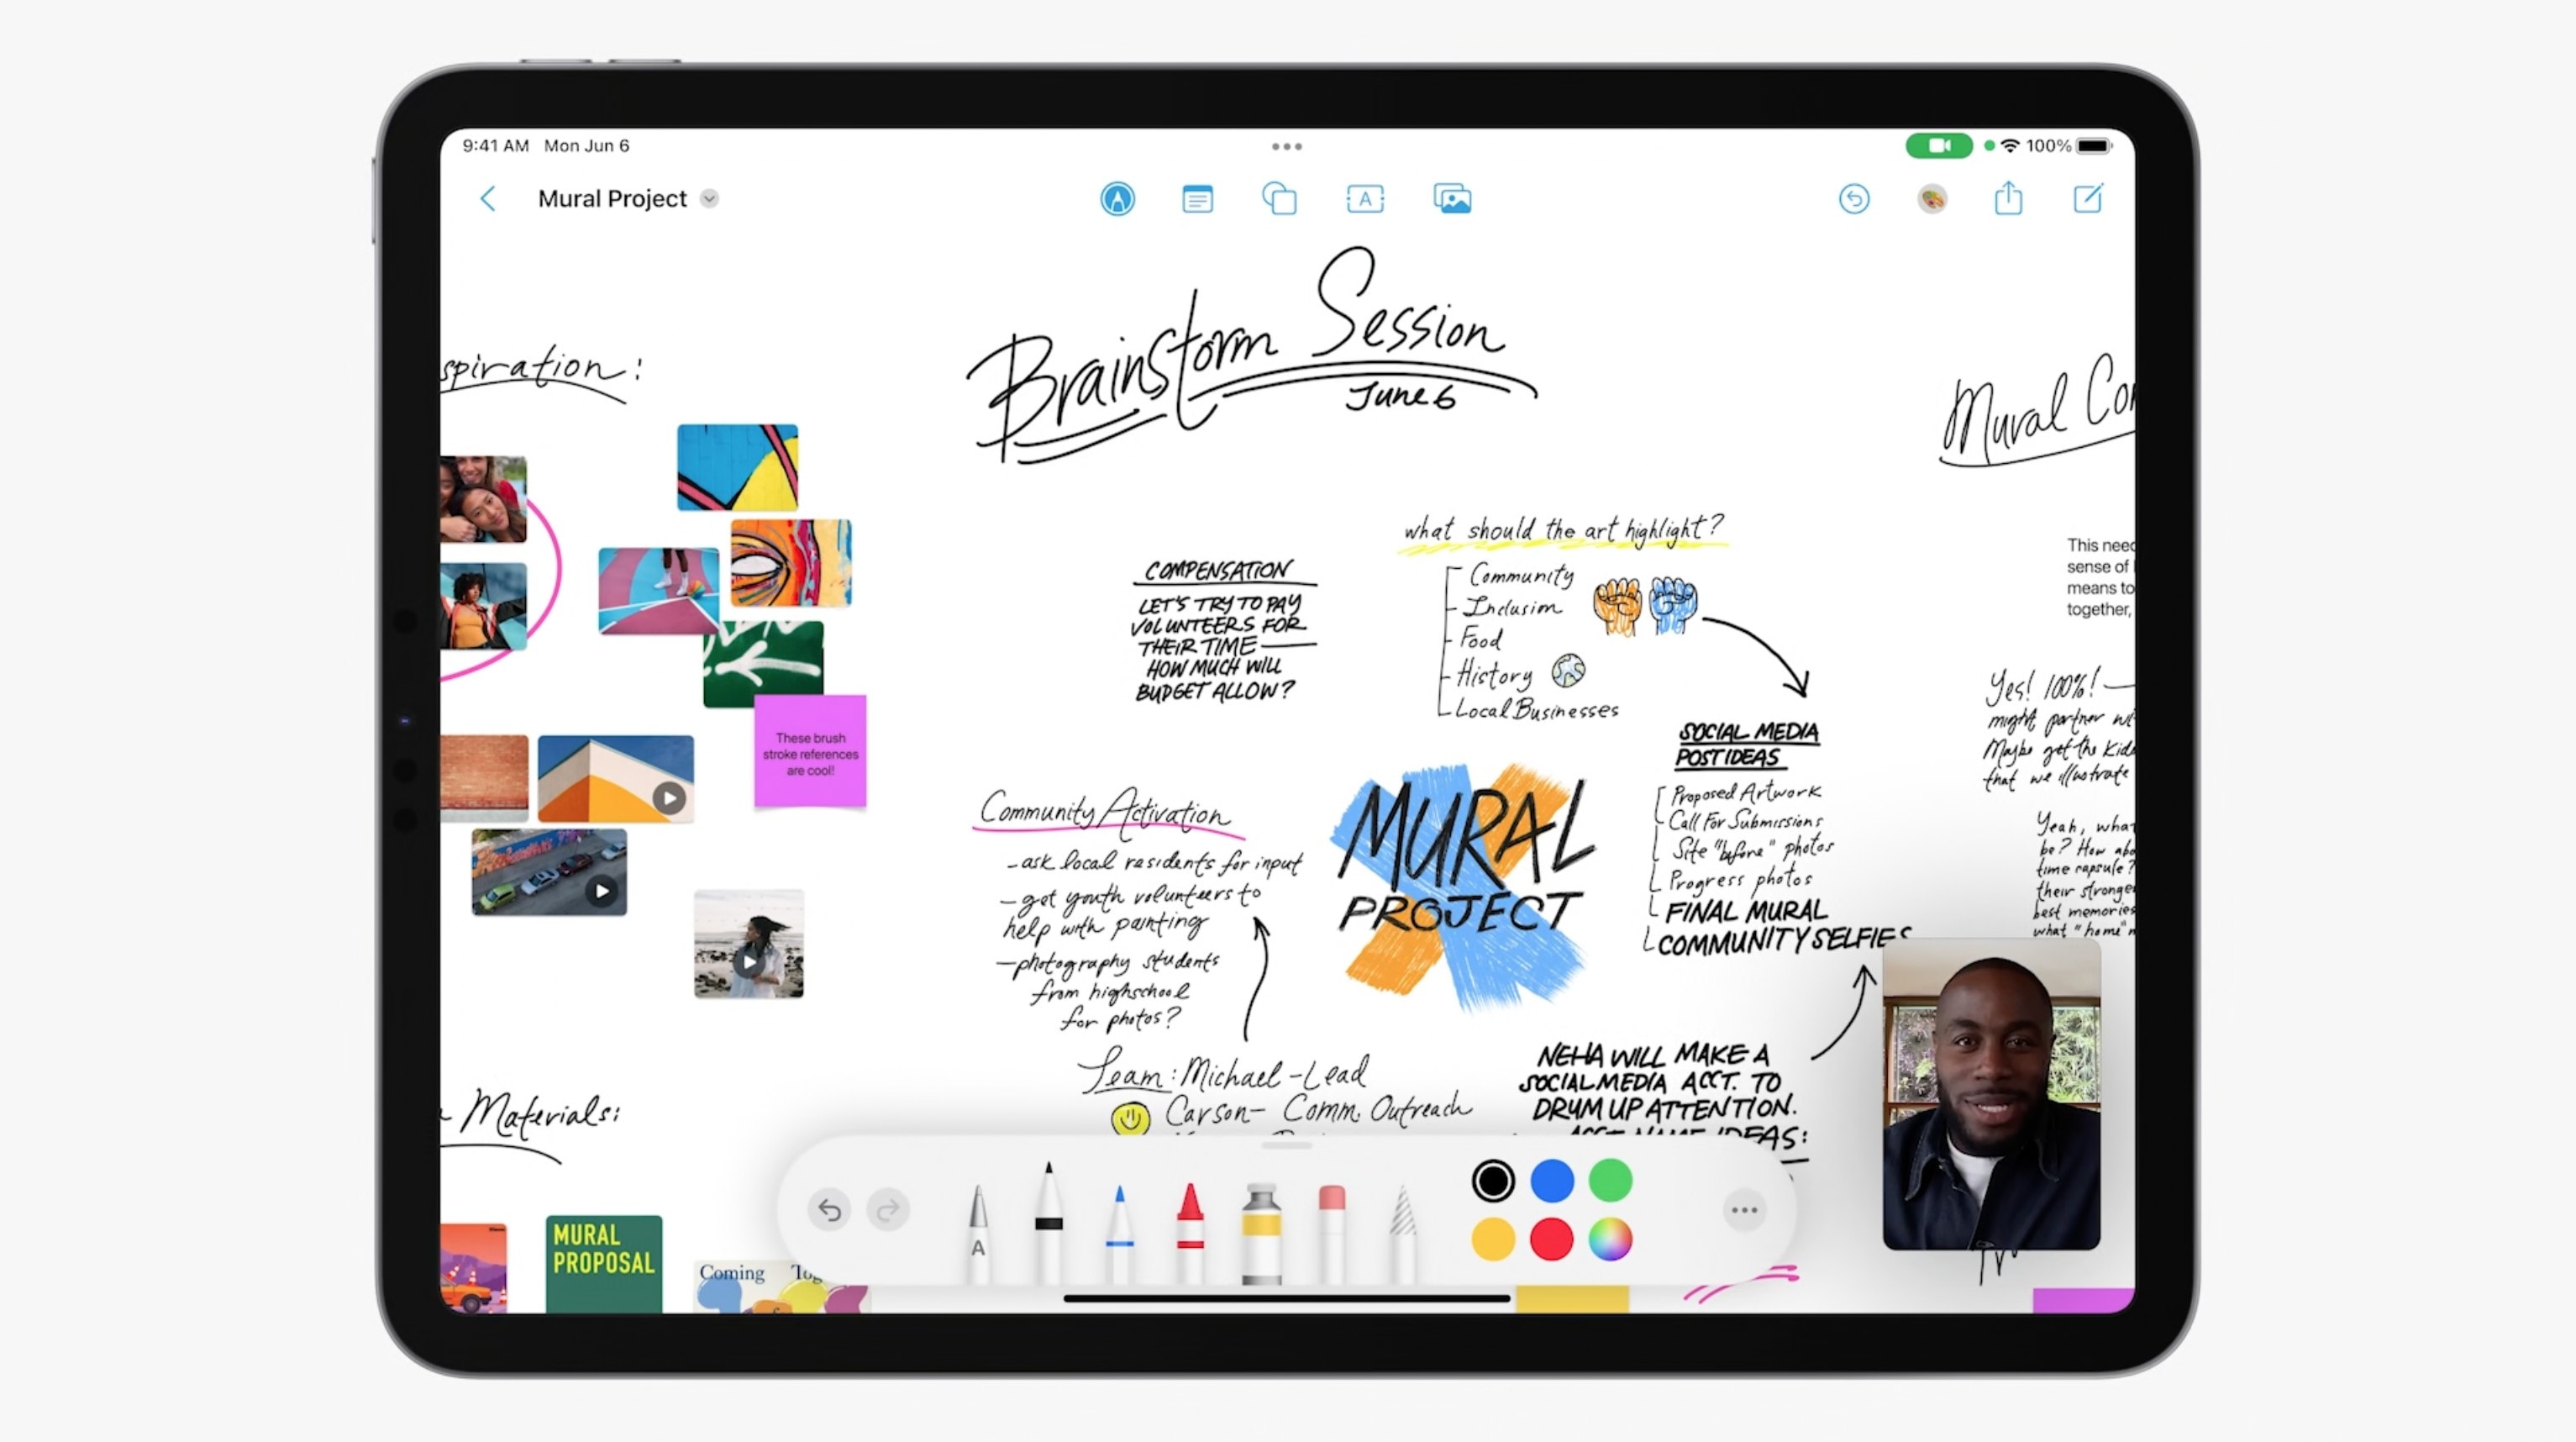 New iOS 16.2 features: Freeform is like a virtual whiteboard that will enable collaboration on iPhone, iPad and Mac.